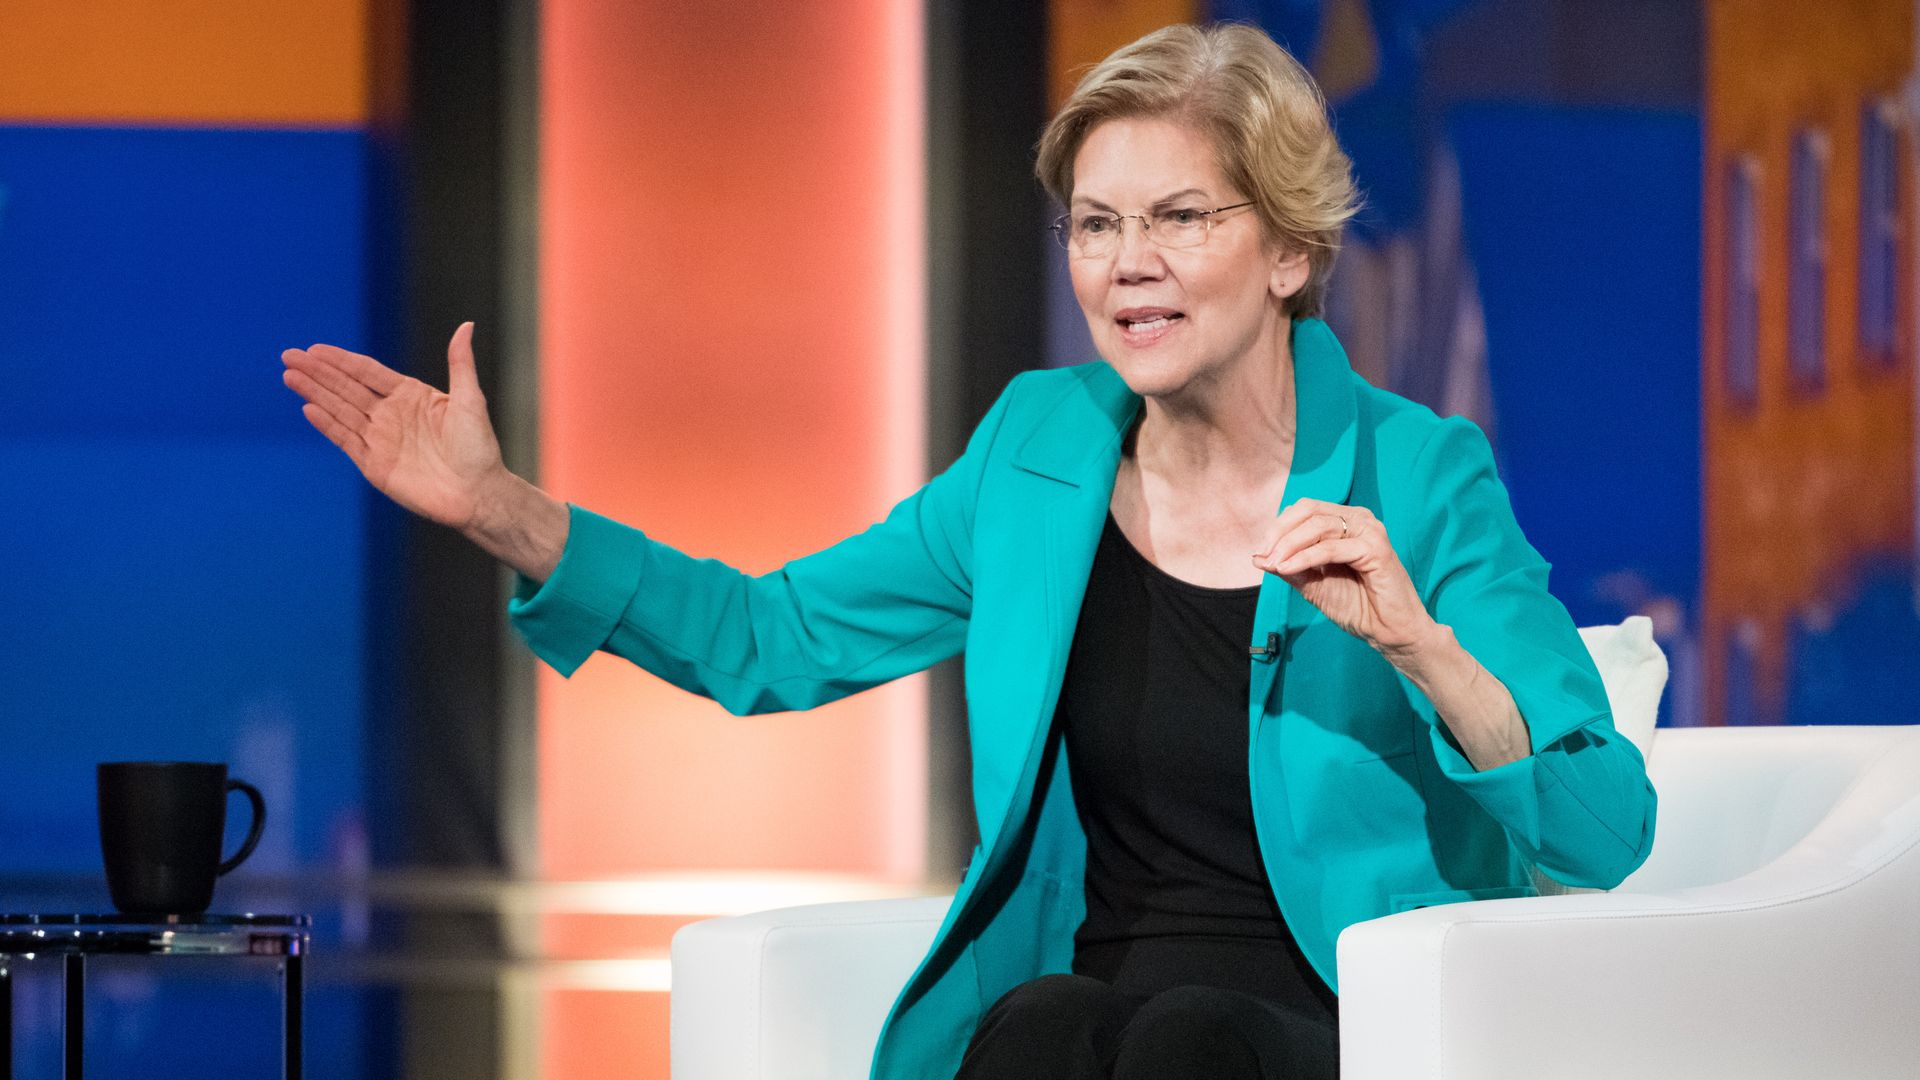 In this image, Warren sits on a white sofa and speaks while gesturing.